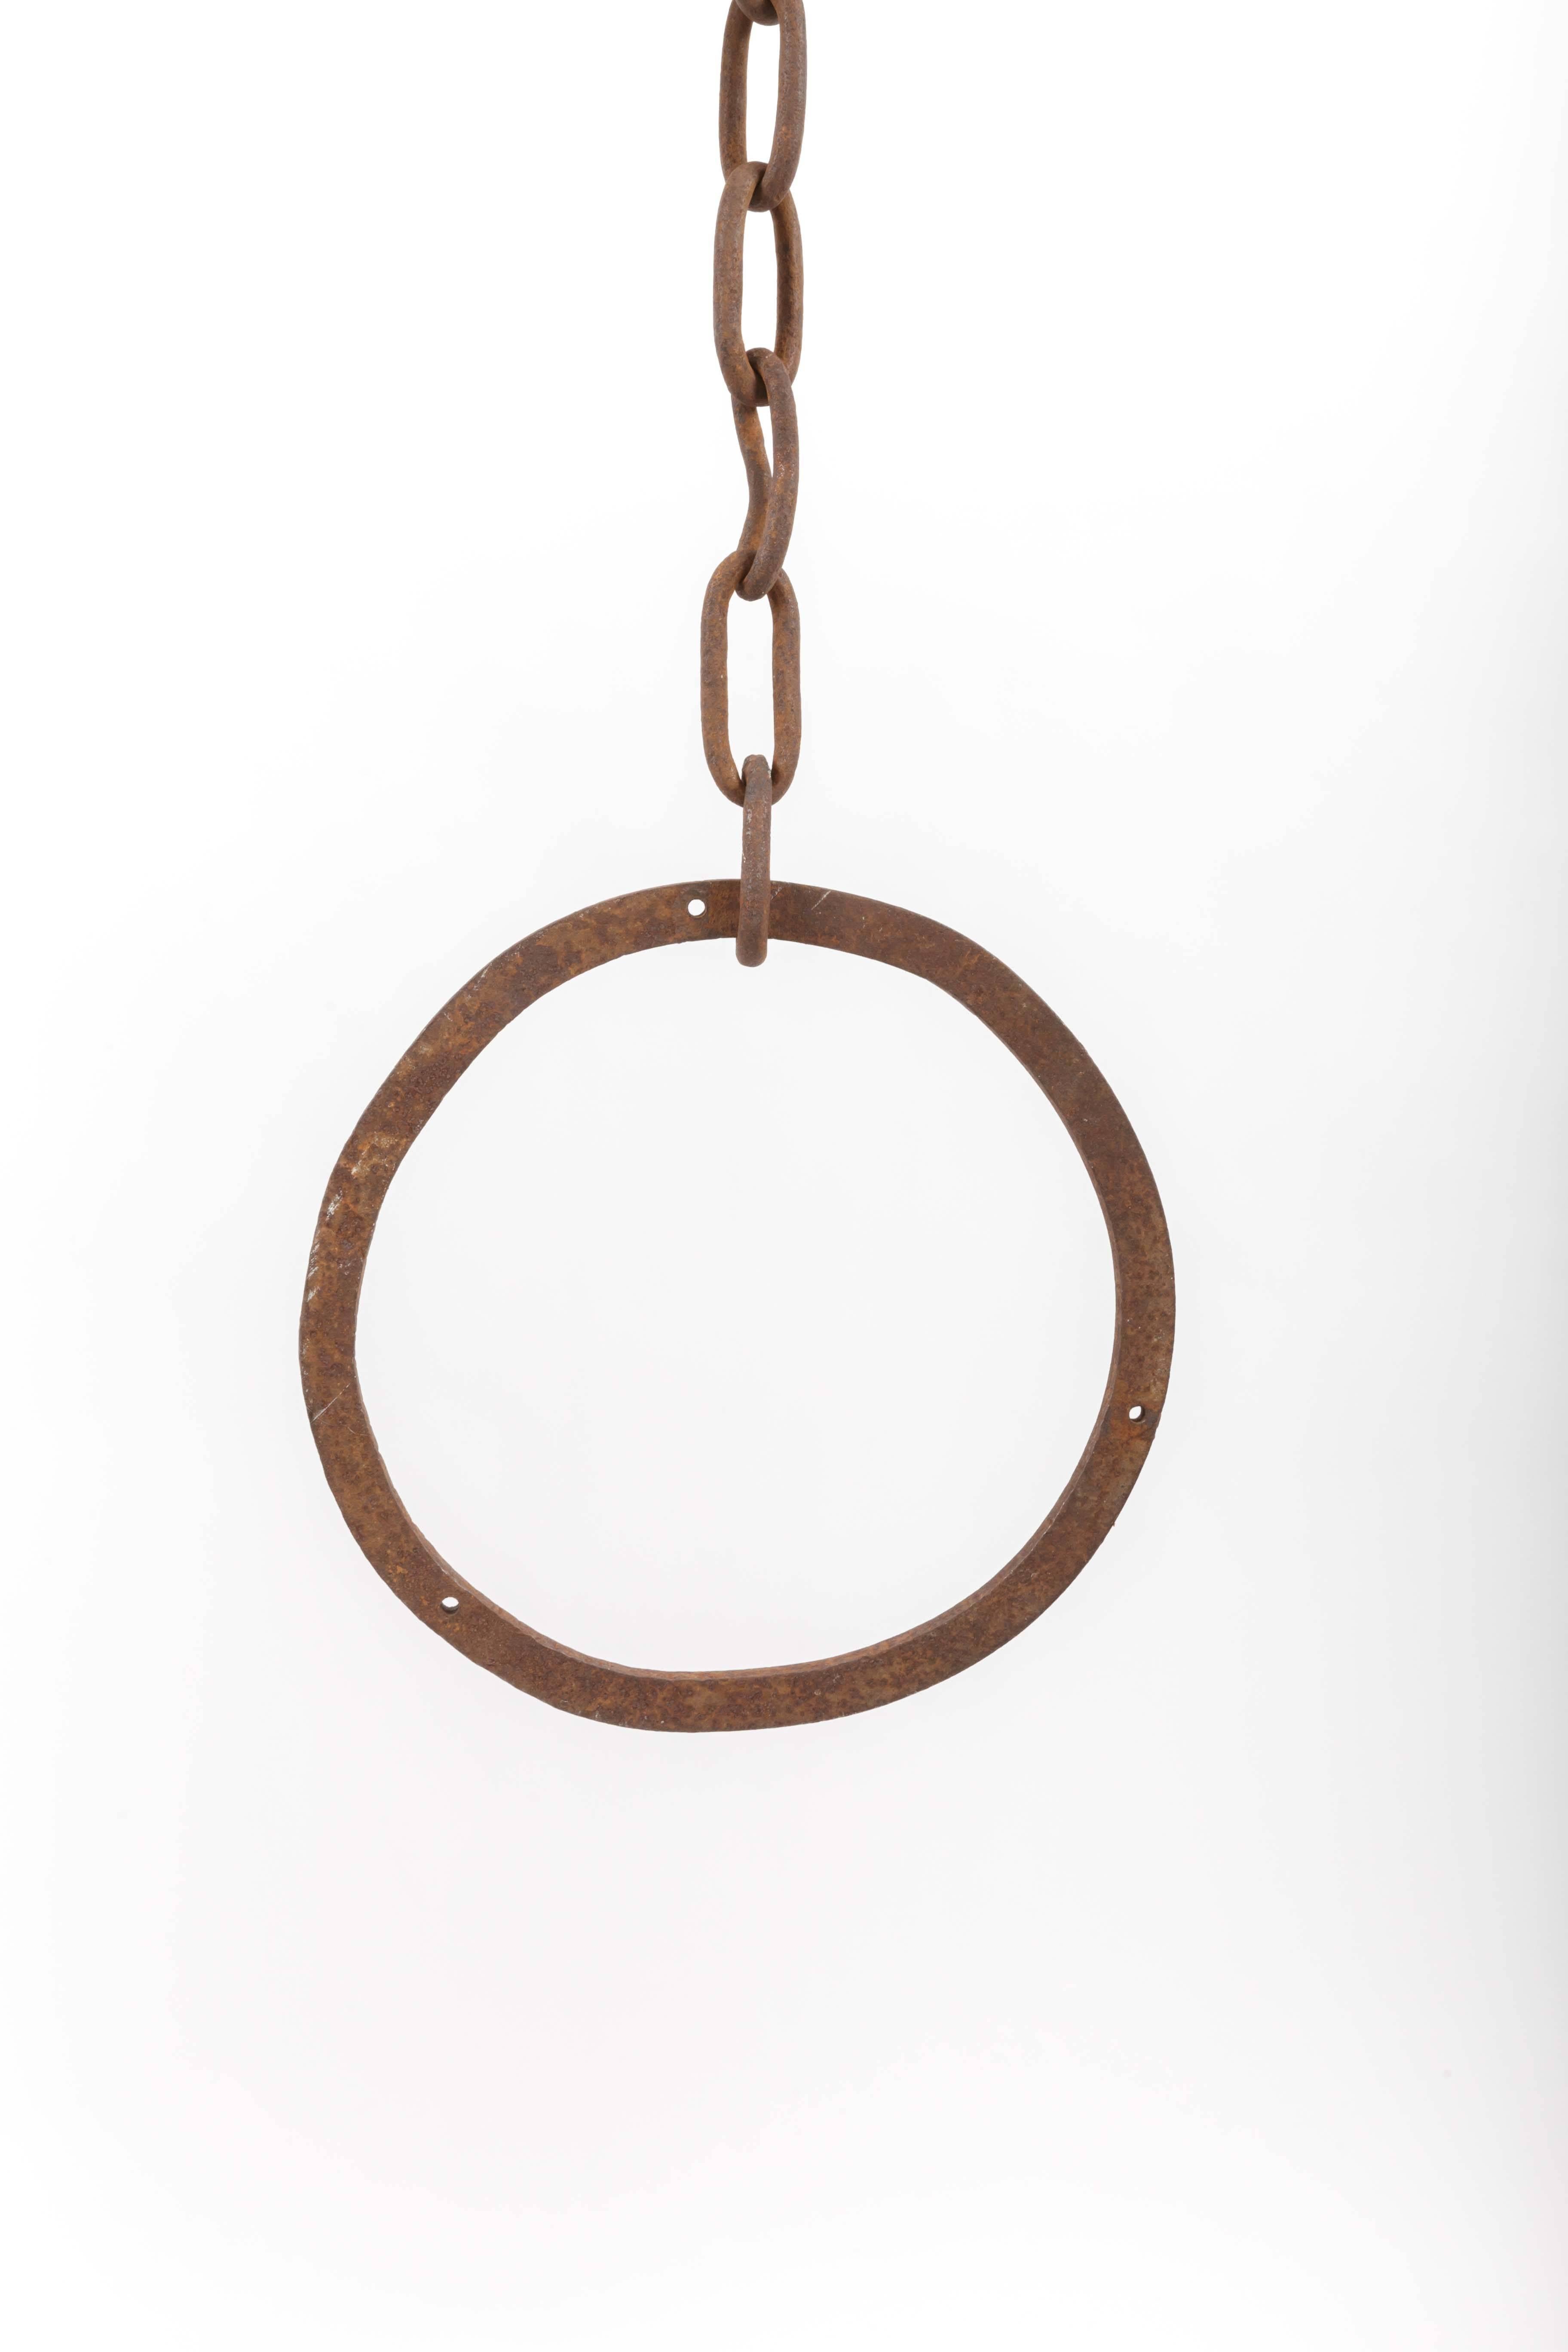 American Hand-Forged Iron Horse Ring and Chain, Usa, Early 20th Century